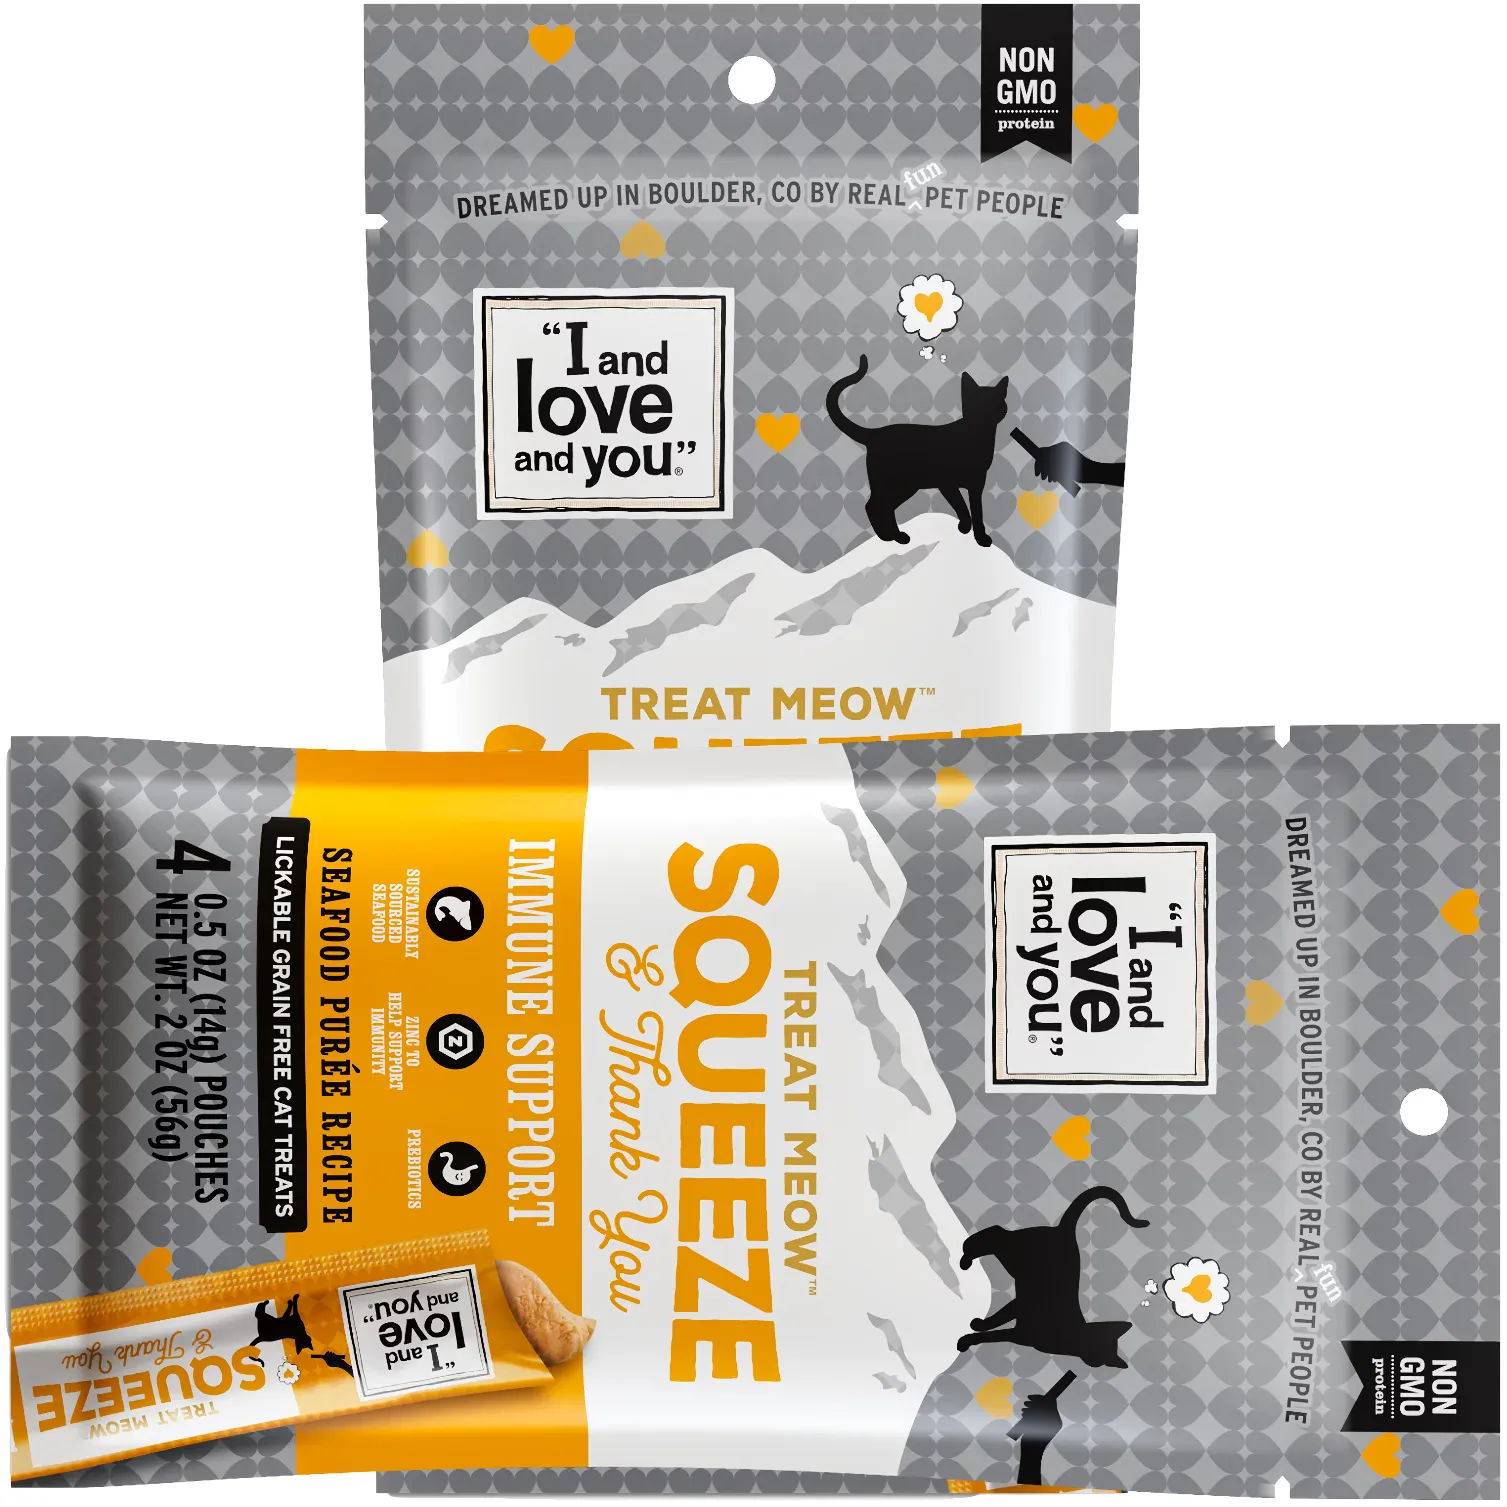 Free "I And Love And You" Pet Interactive Cat Treats